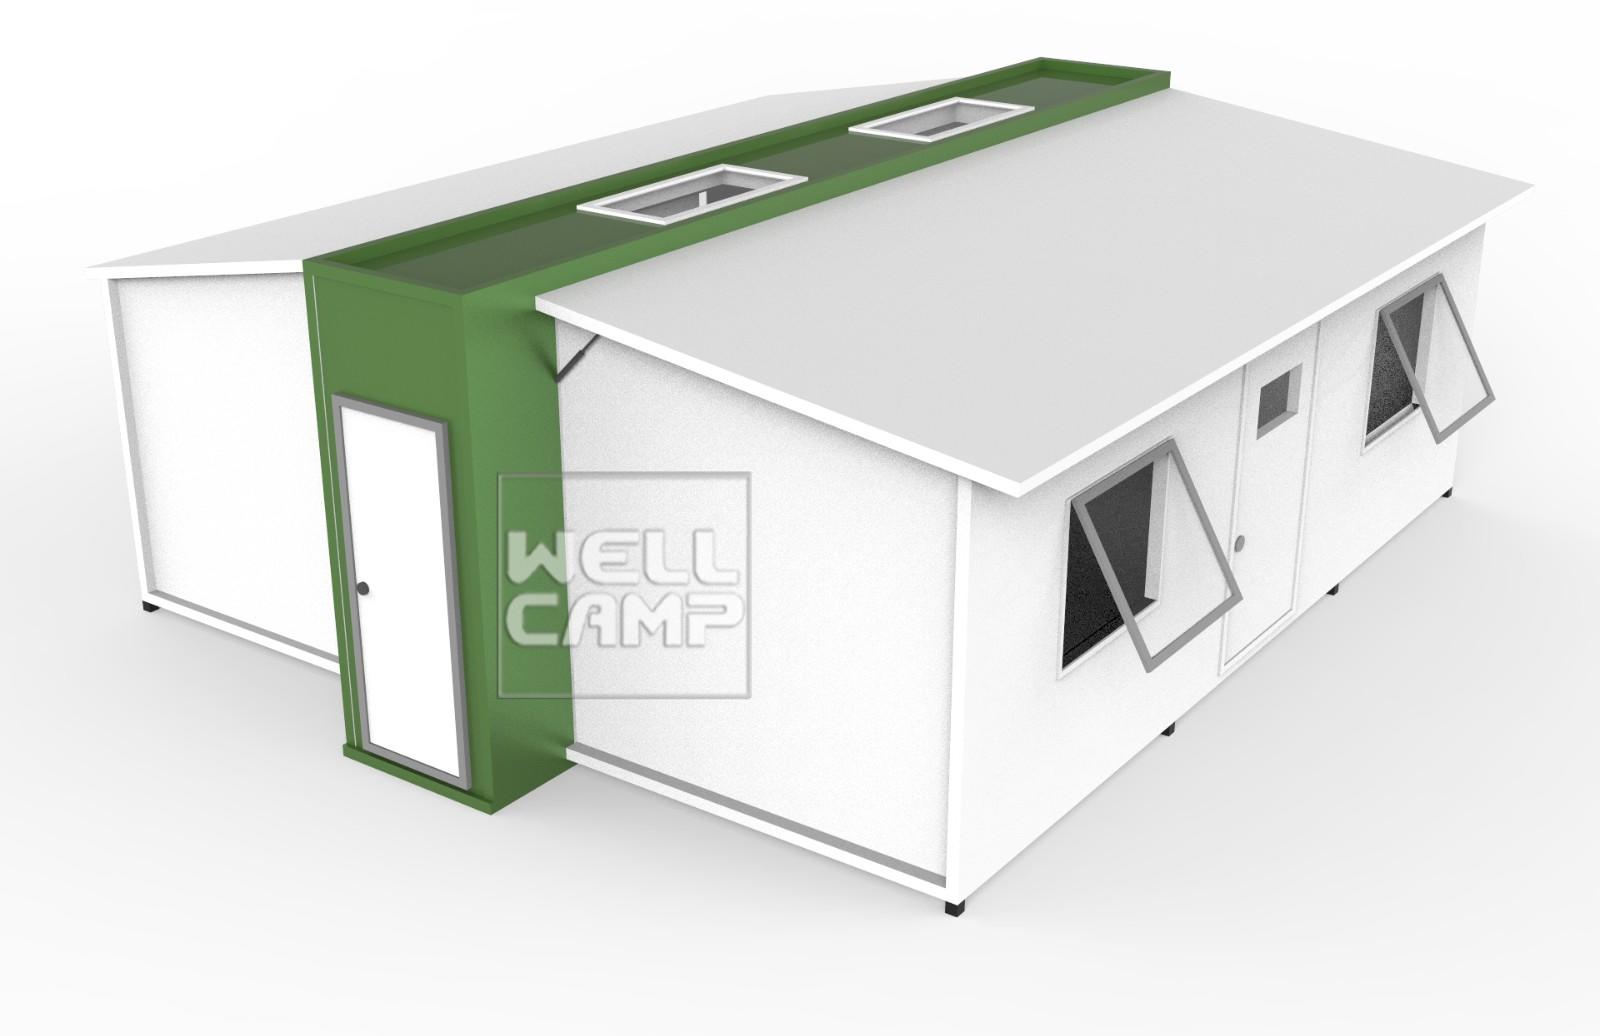 WELLCAMP expandable shipping container home family student dormitory expandable